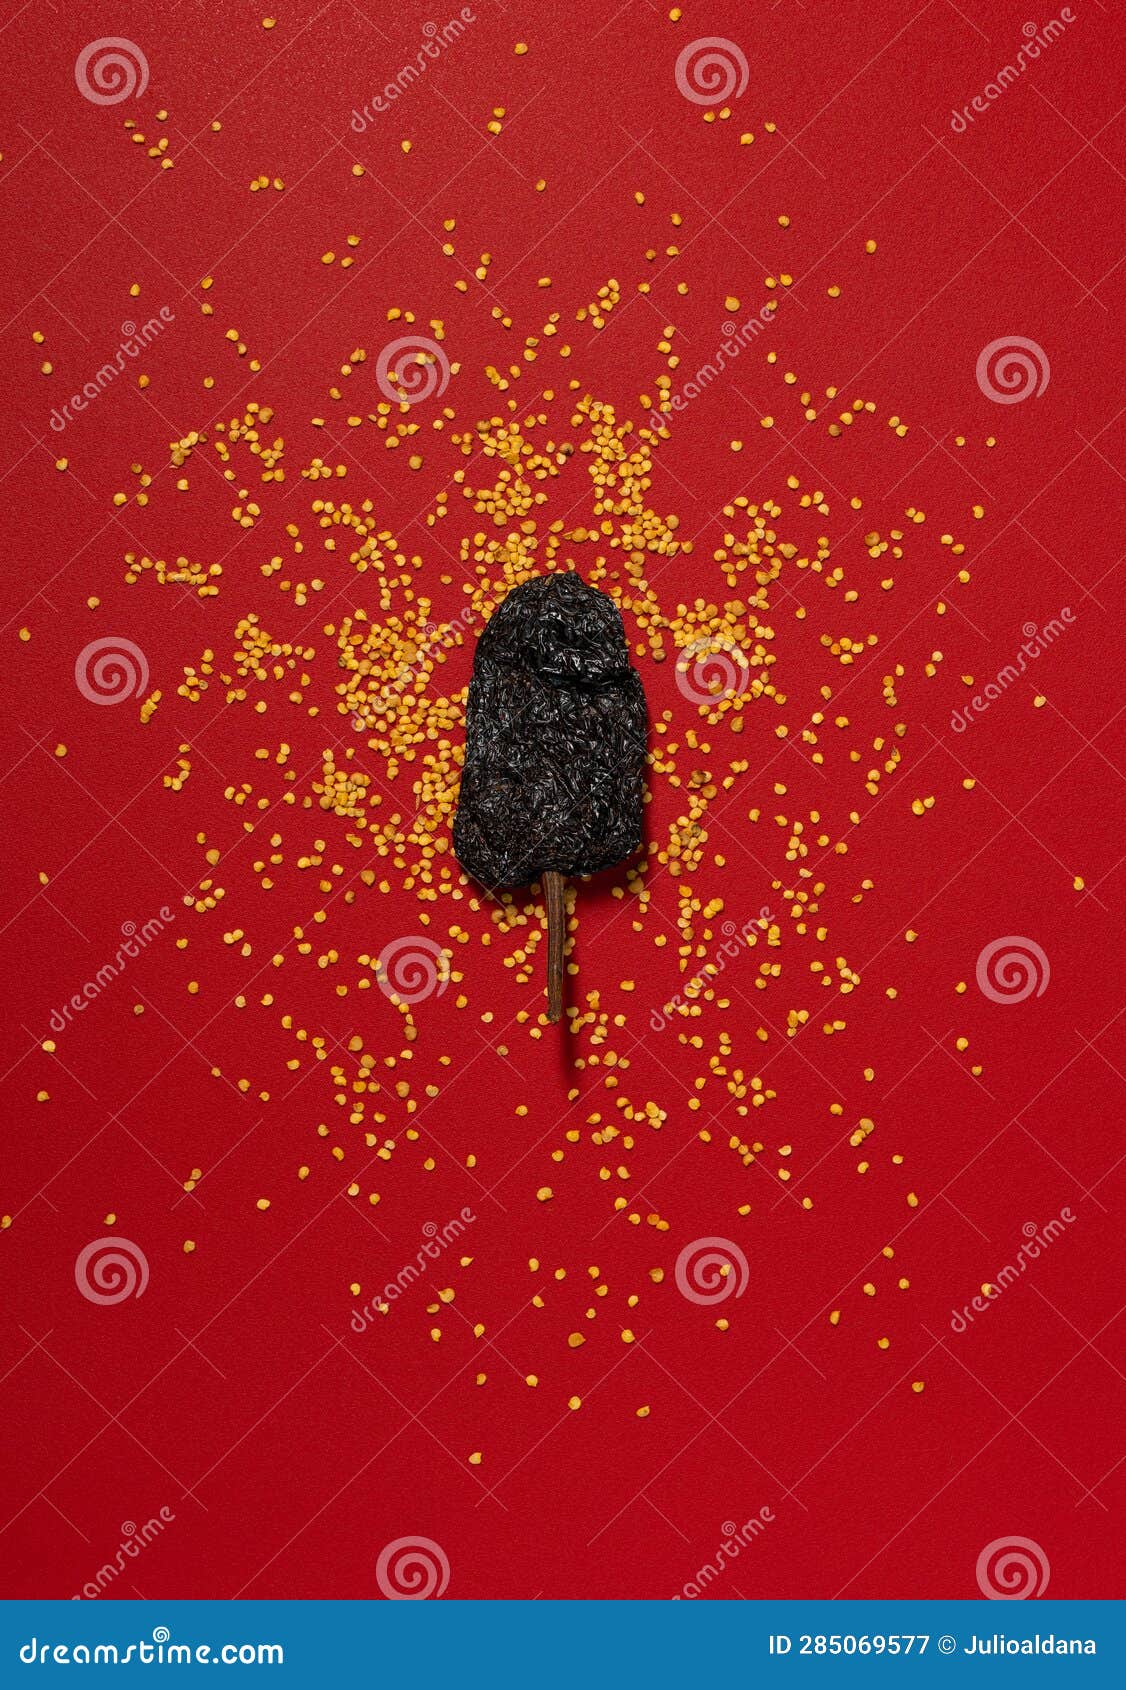 dried chili and seeds on red background, chile ancho pasilla mexican spice flat lay